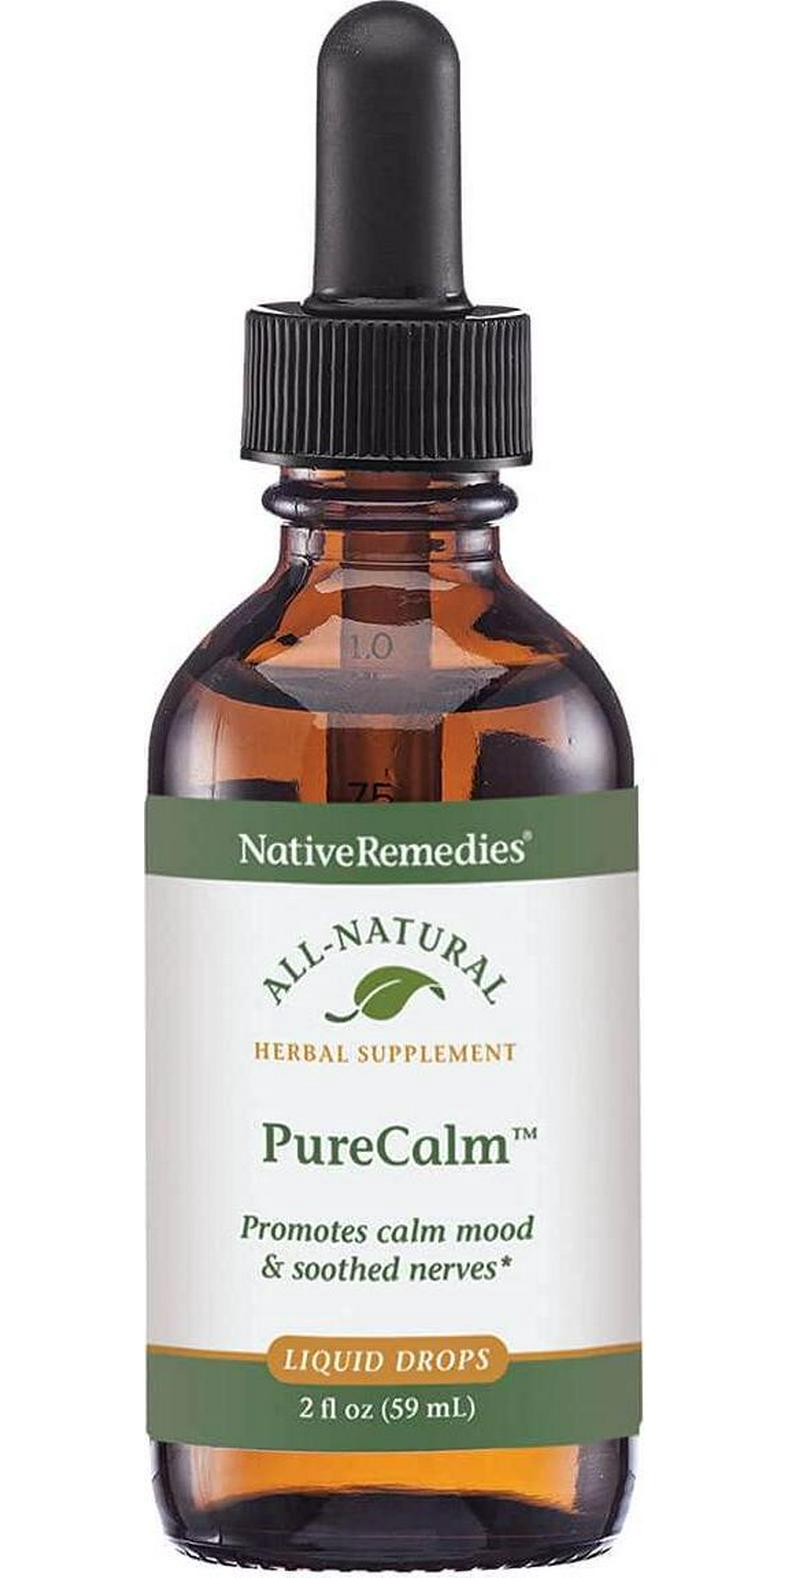 Native Remedies PureCalm - All Natural Herbal Supplement Promotes Feelings of Calm During Times of Pressure, Stress or Nervous Tension - 59mL